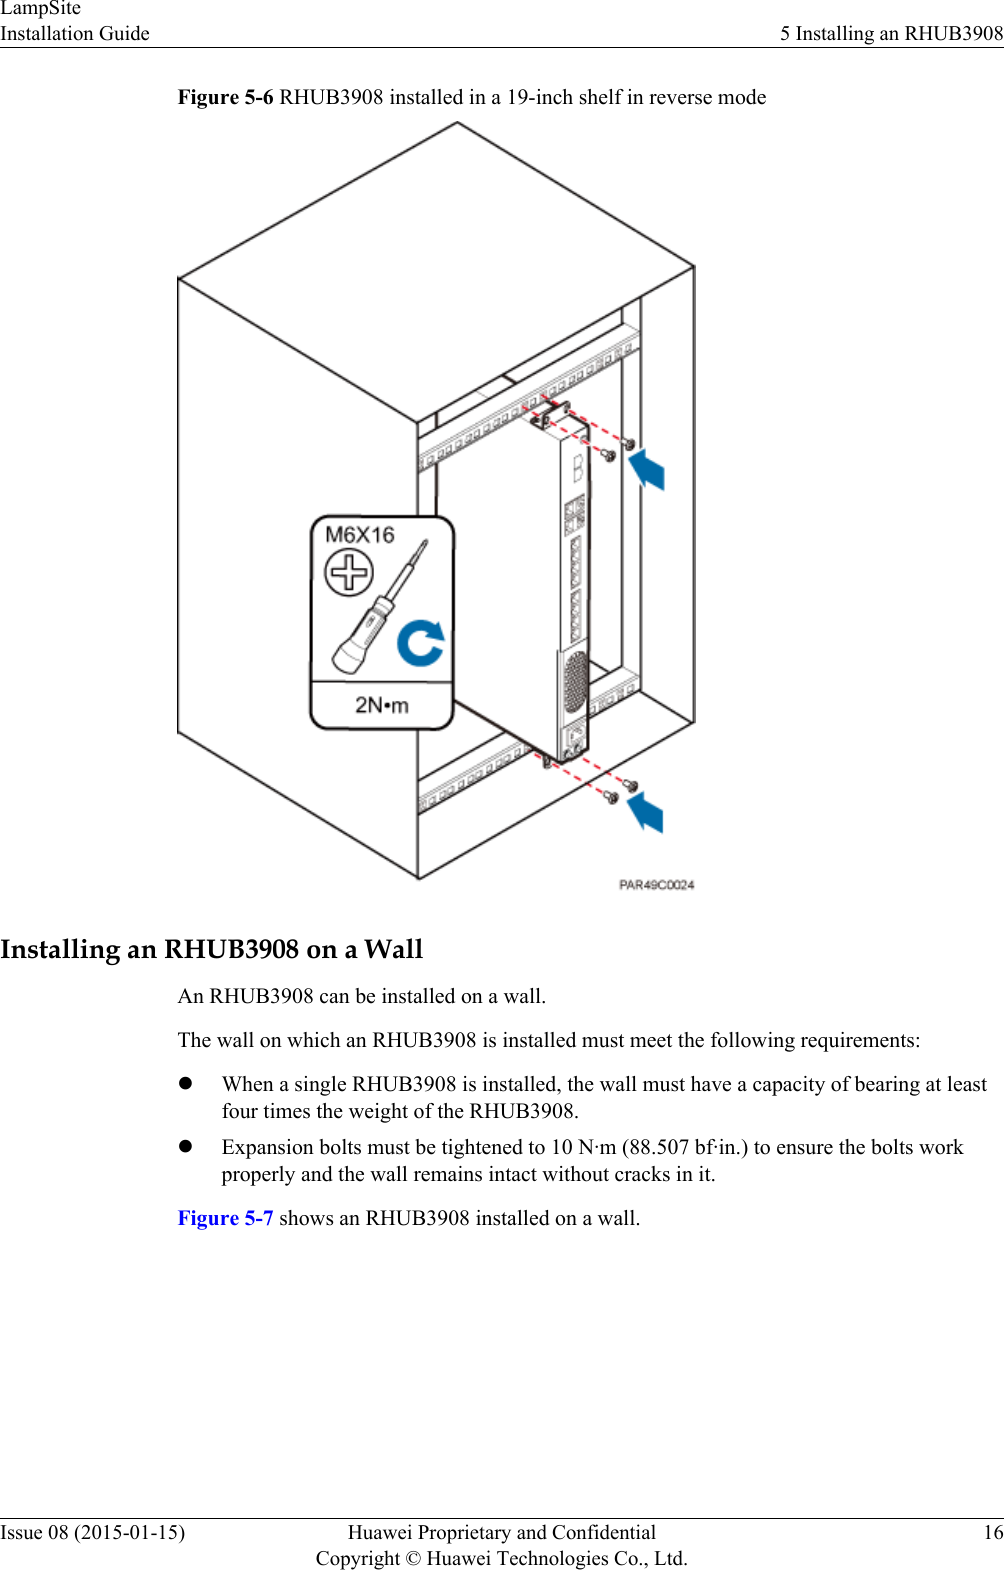 Figure 5-6 RHUB3908 installed in a 19-inch shelf in reverse modeInstalling an RHUB3908 on a WallAn RHUB3908 can be installed on a wall.The wall on which an RHUB3908 is installed must meet the following requirements:lWhen a single RHUB3908 is installed, the wall must have a capacity of bearing at leastfour times the weight of the RHUB3908.lExpansion bolts must be tightened to 10 N·m (88.507 bf·in.) to ensure the bolts workproperly and the wall remains intact without cracks in it.Figure 5-7 shows an RHUB3908 installed on a wall.LampSiteInstallation Guide 5 Installing an RHUB3908Issue 08 (2015-01-15) Huawei Proprietary and ConfidentialCopyright © Huawei Technologies Co., Ltd.16